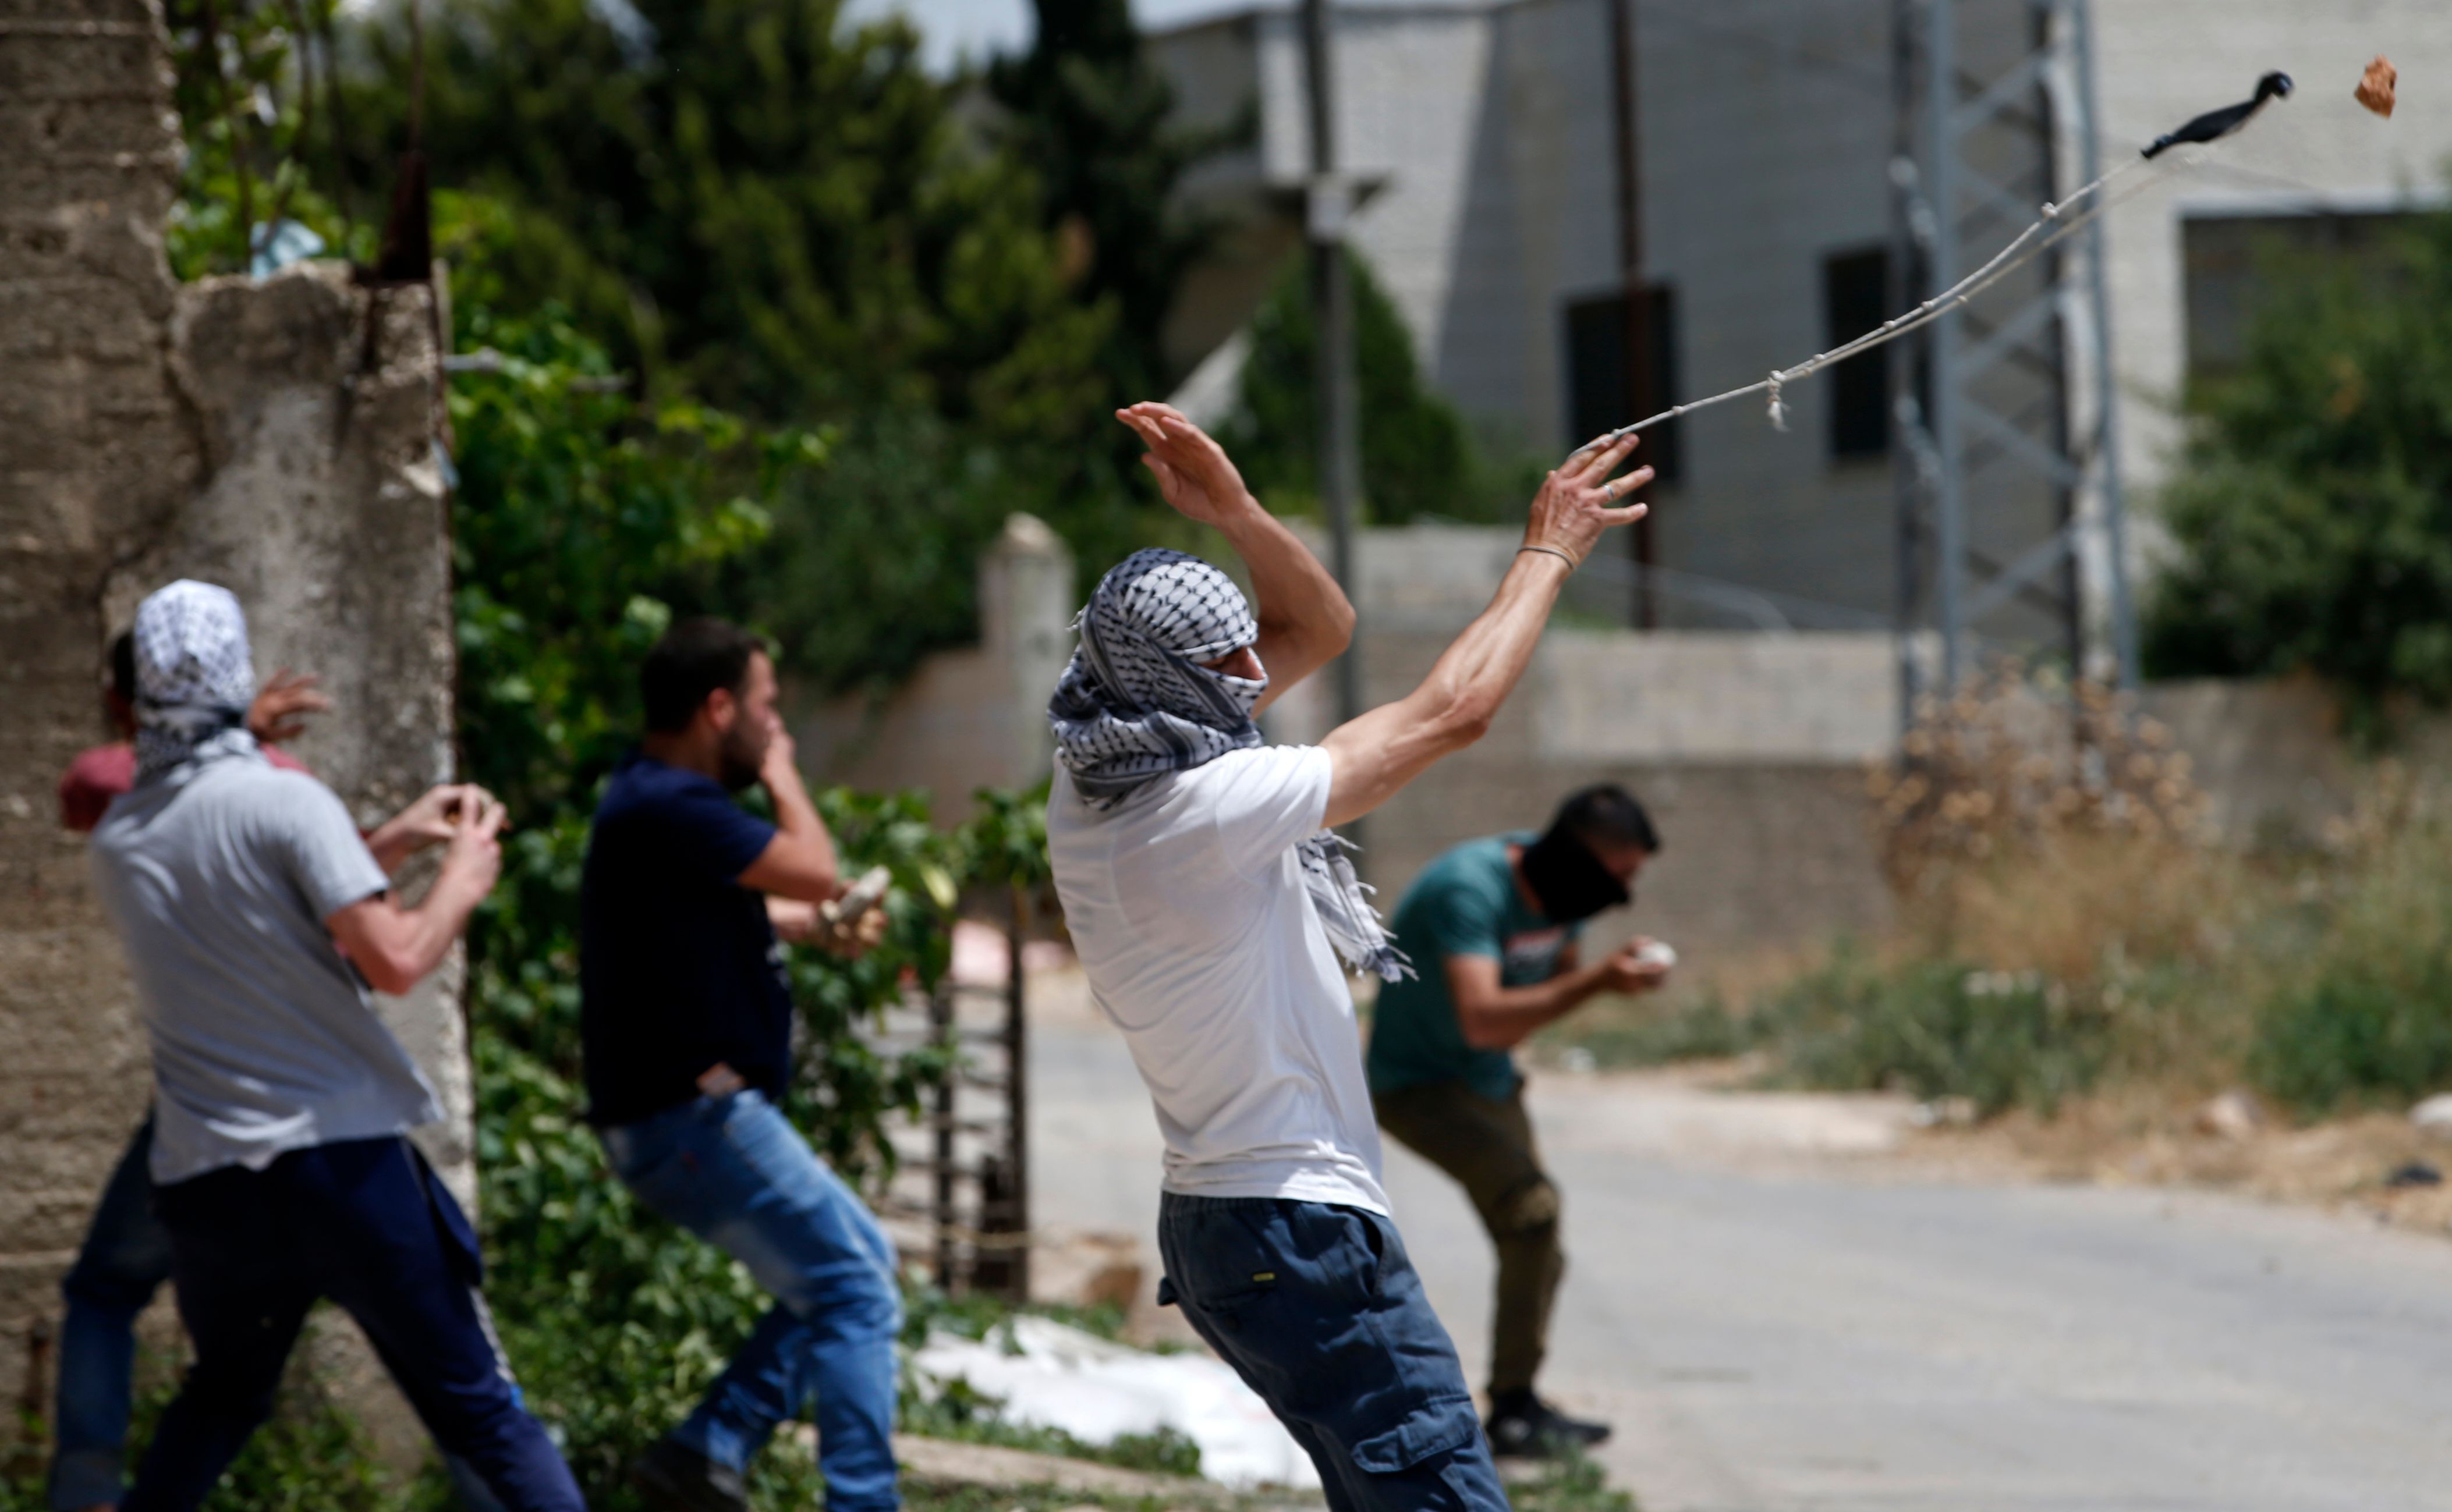 A Palestinian protester uses a slingshot to hurl objects during clashes with Israeli security forces following a weekly demonstration against the expropriation of Palestinian lands by Israel in the village of Kfar Qaddum, near Nablus in the West Bank, on May 31, 2019. (JAAFAR ASHTIYEH/AFP/Getty Images)